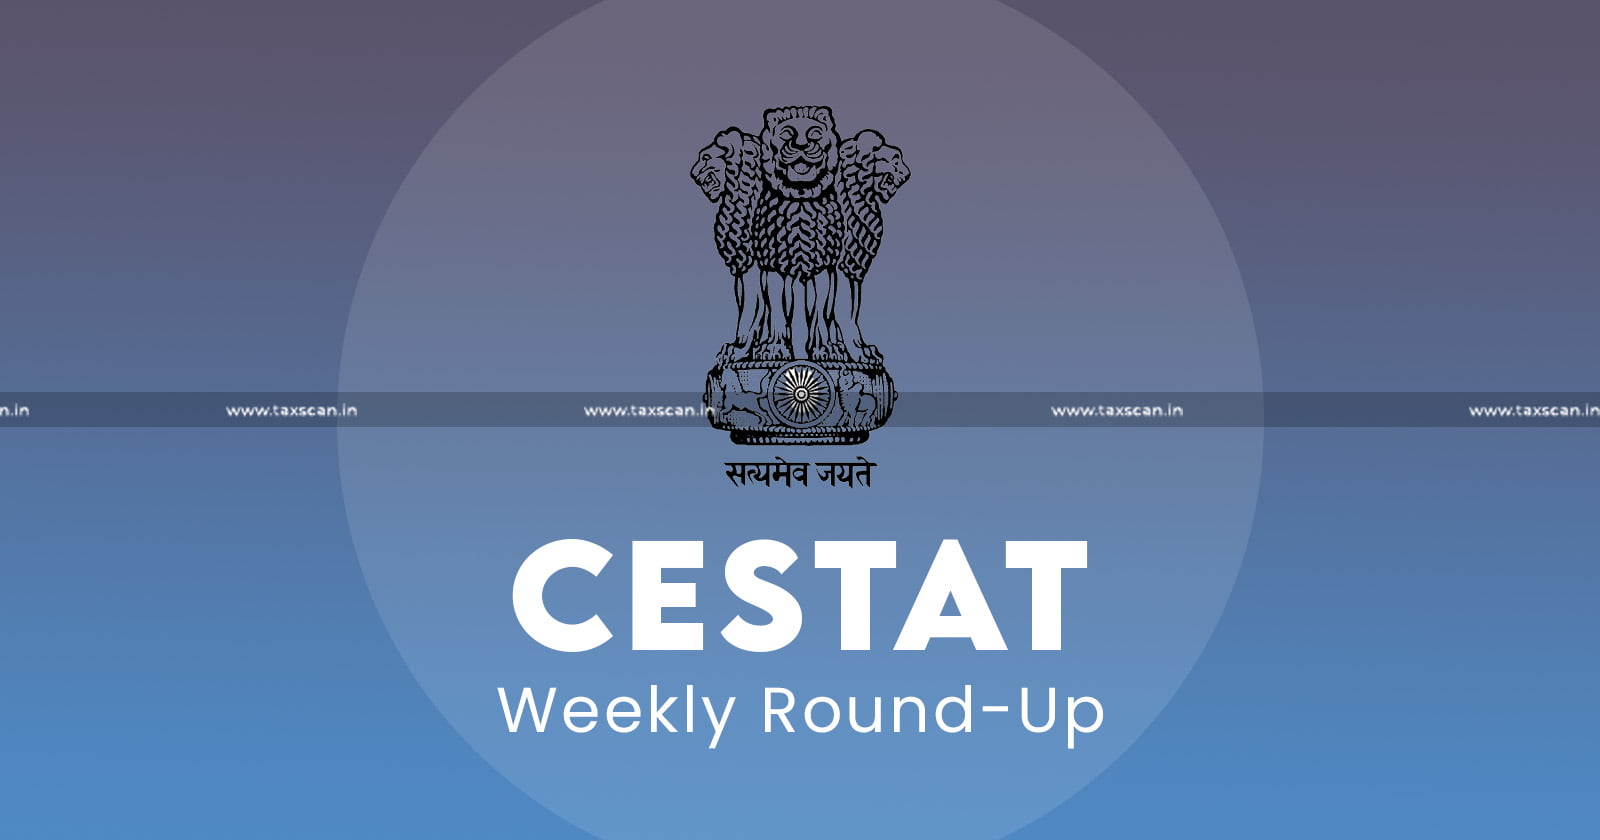 CESTAT Weekly Round Up - Weekly Round Up - Weekly - Round Up - Excise and Customs - TAXSCAN